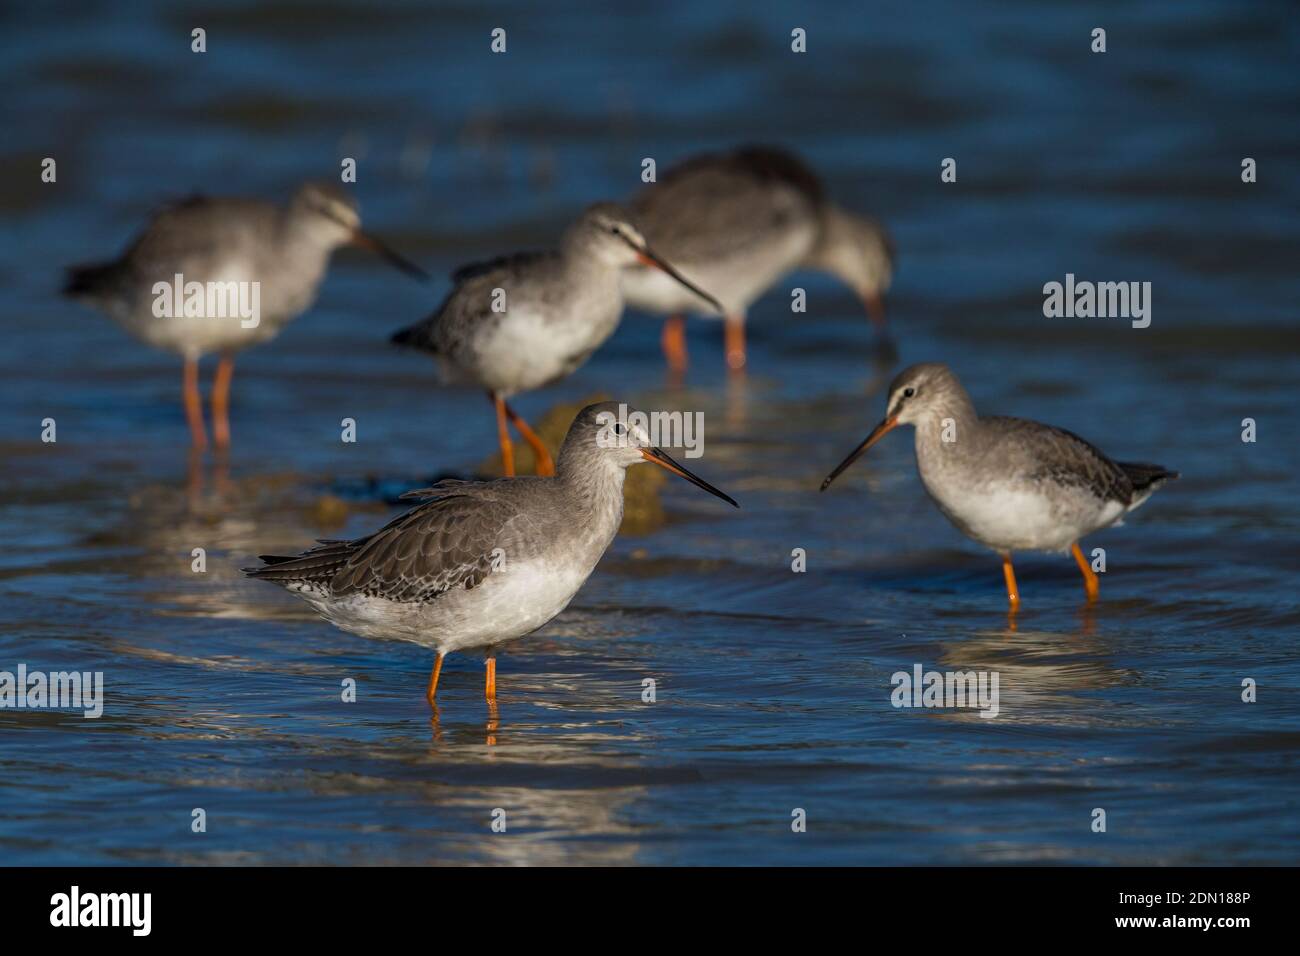 SpWinter plumaged Spotted Redshanks wading in shallow water. Stock Photo